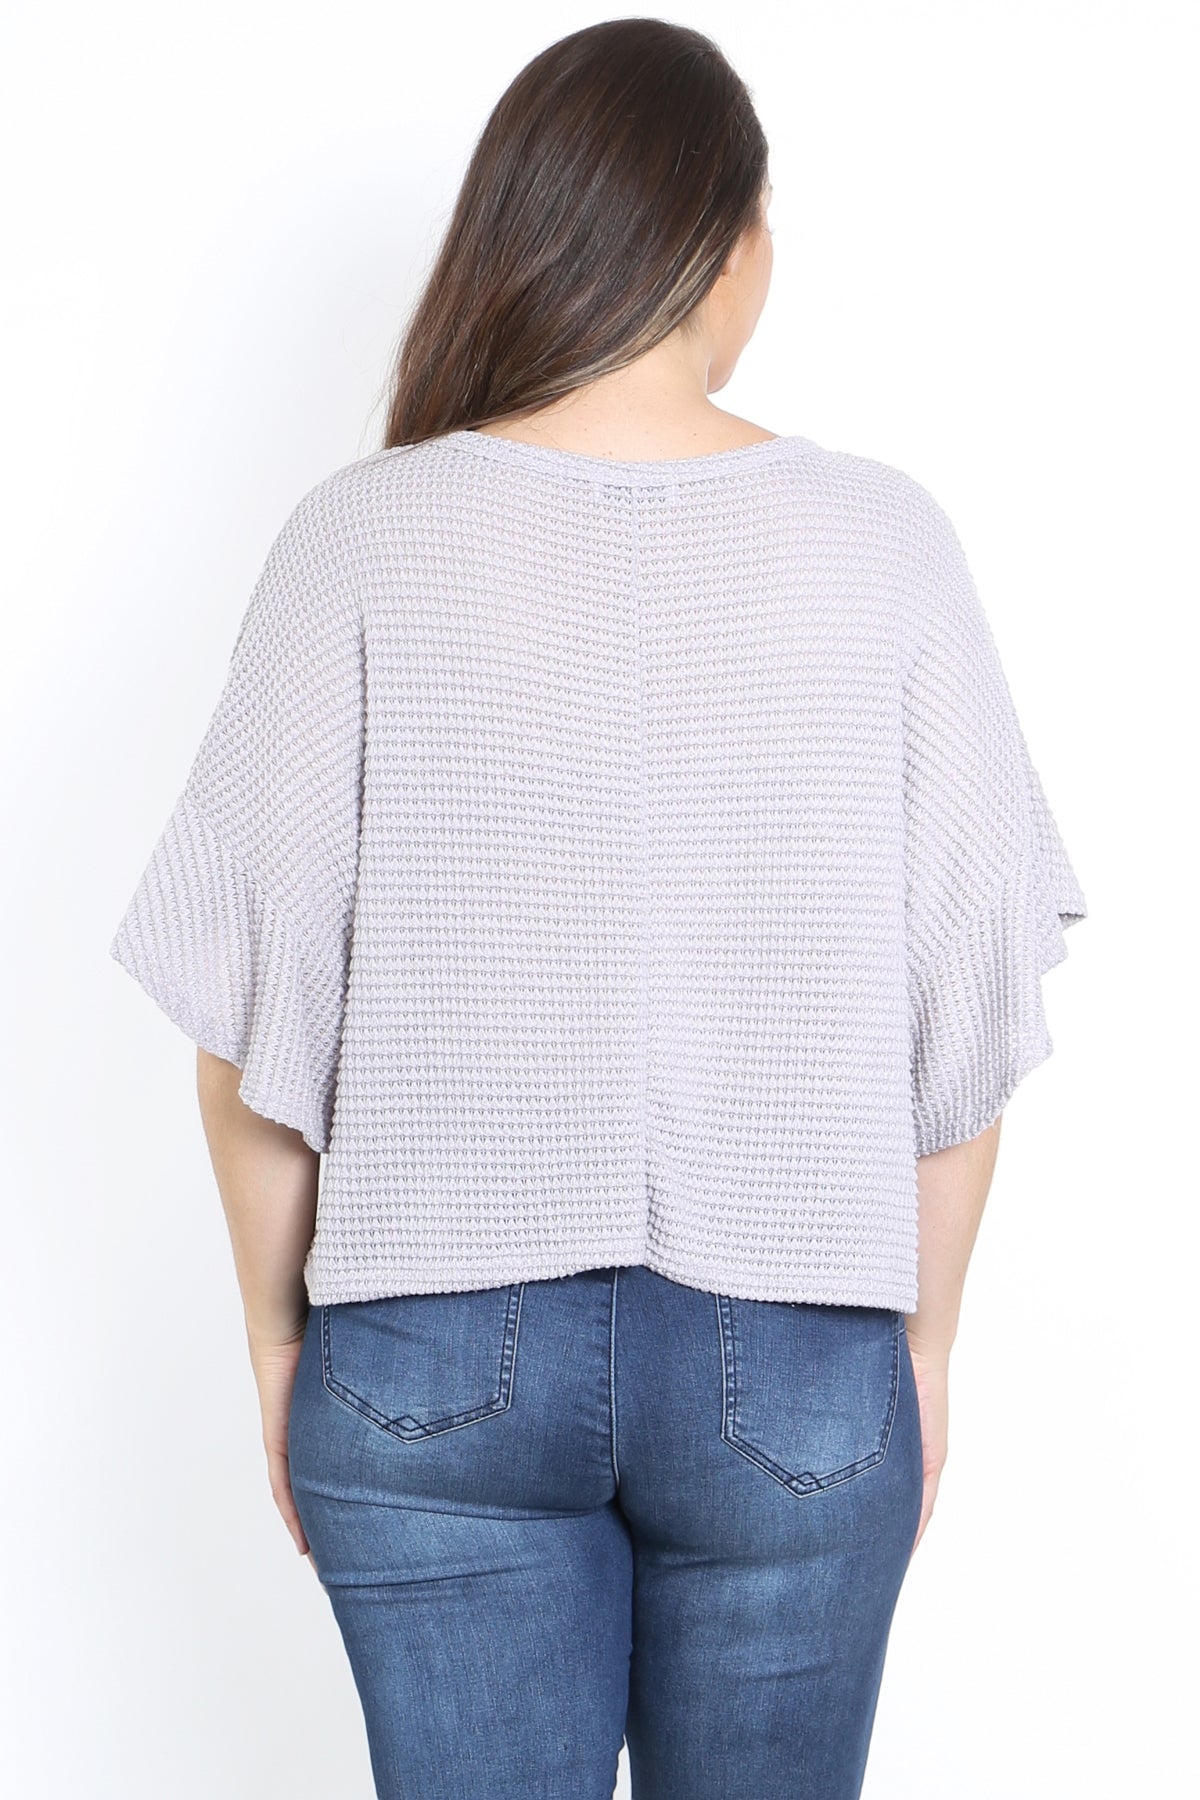 DUSTY LAVENDER BOAT NECKLINE RUFFLE SLEEVE WAFFLE FABRIC KNITTED BATWING PLUS SIZE TOP